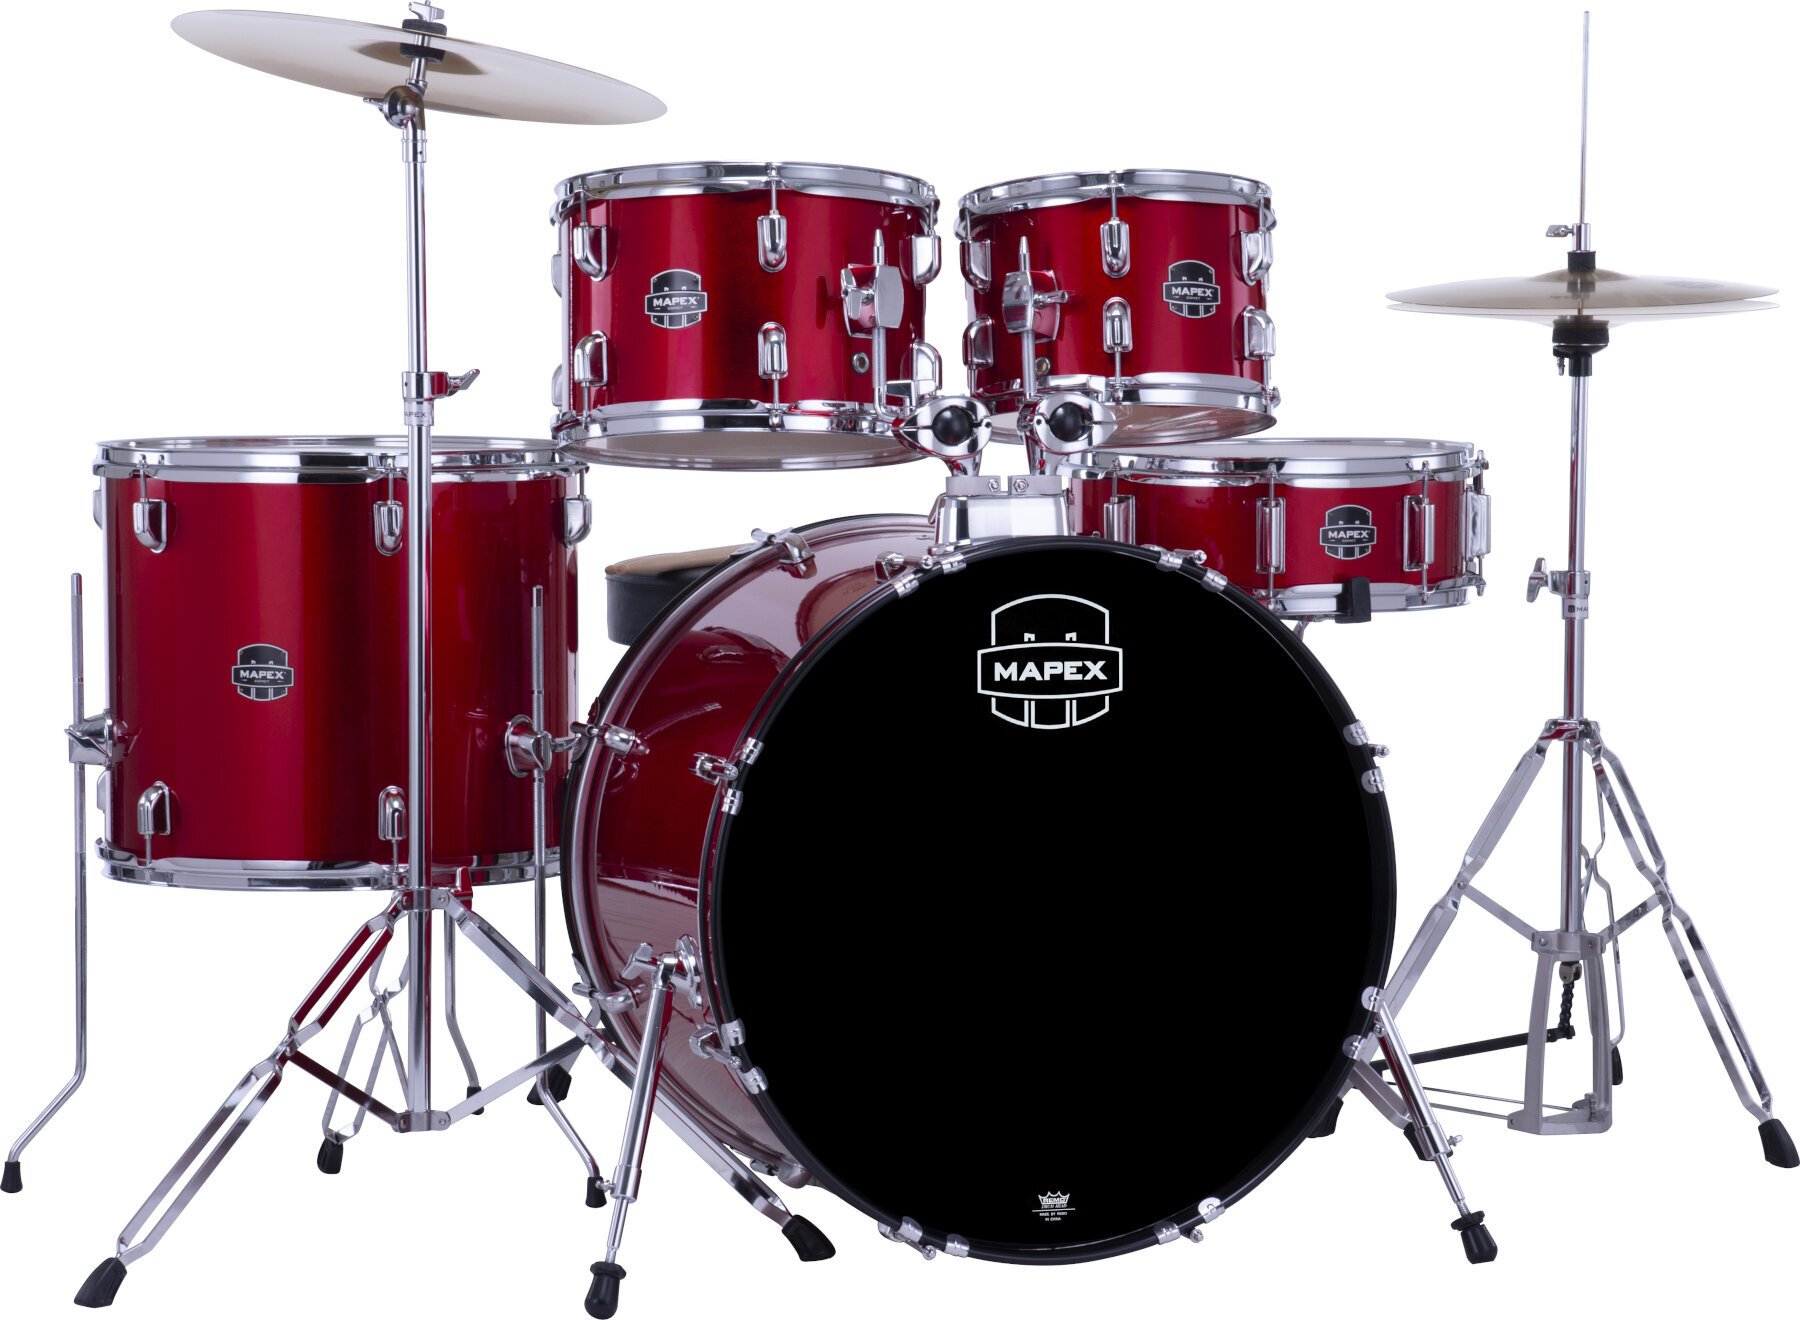 Mapex CM5294FTCIR Comet Infra Red Mapex